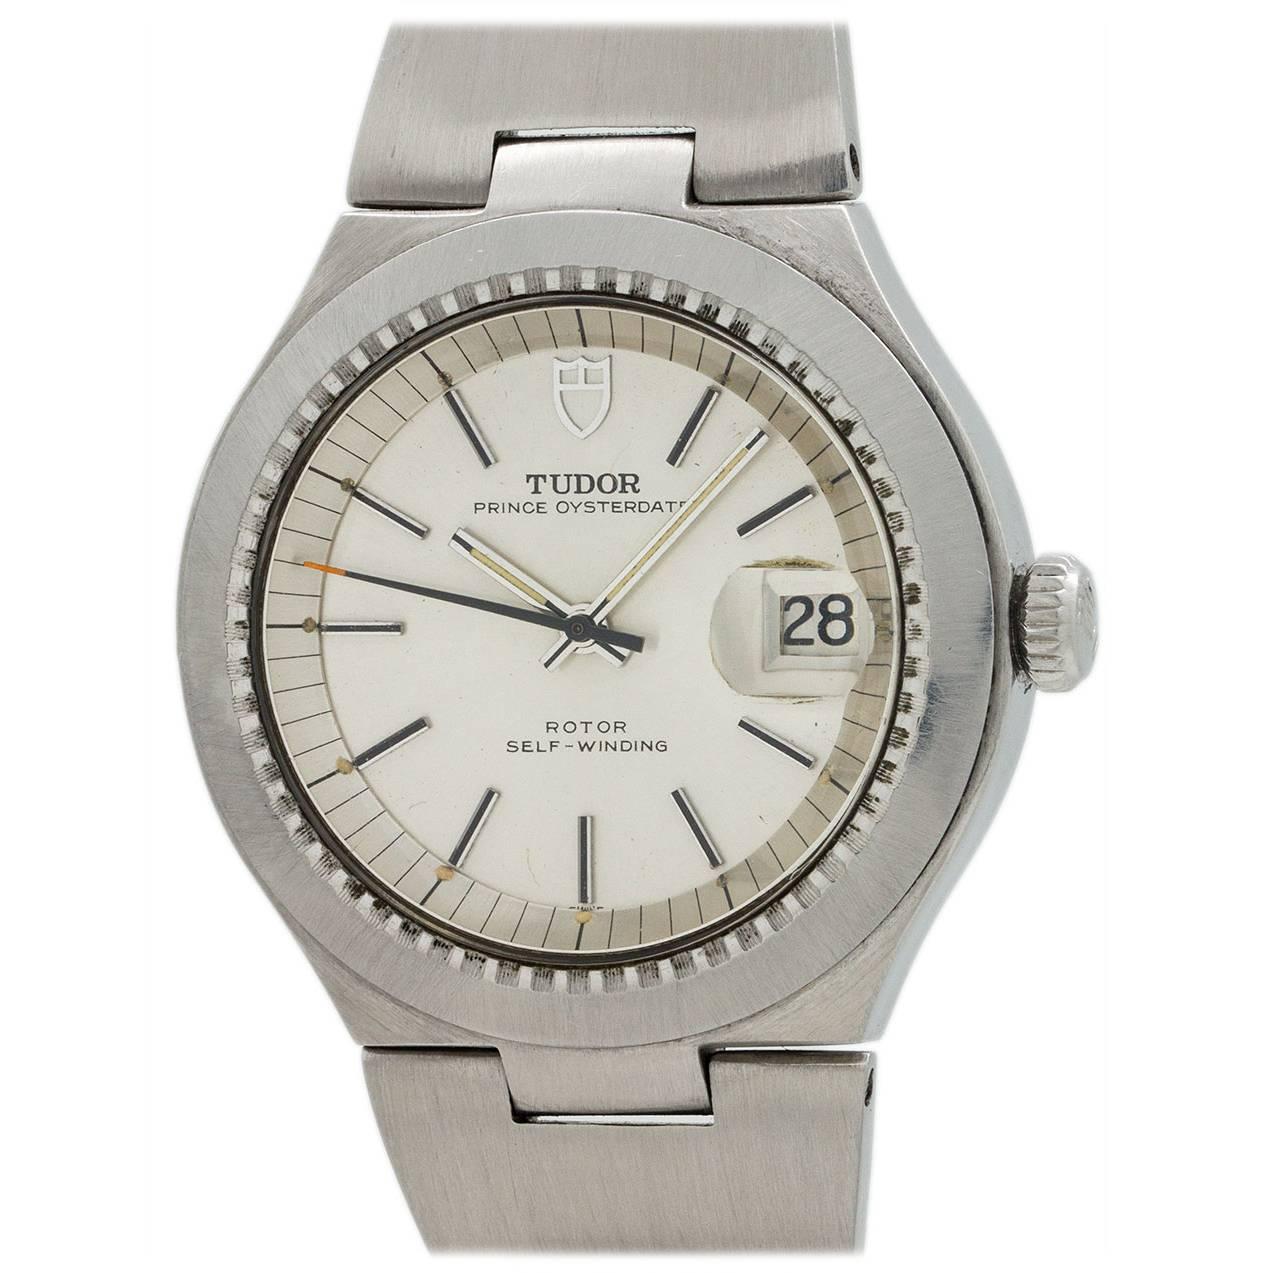 Tudor Stainless Steel Prince Oysterdate Wristwatch Ref 9101/0  For Sale